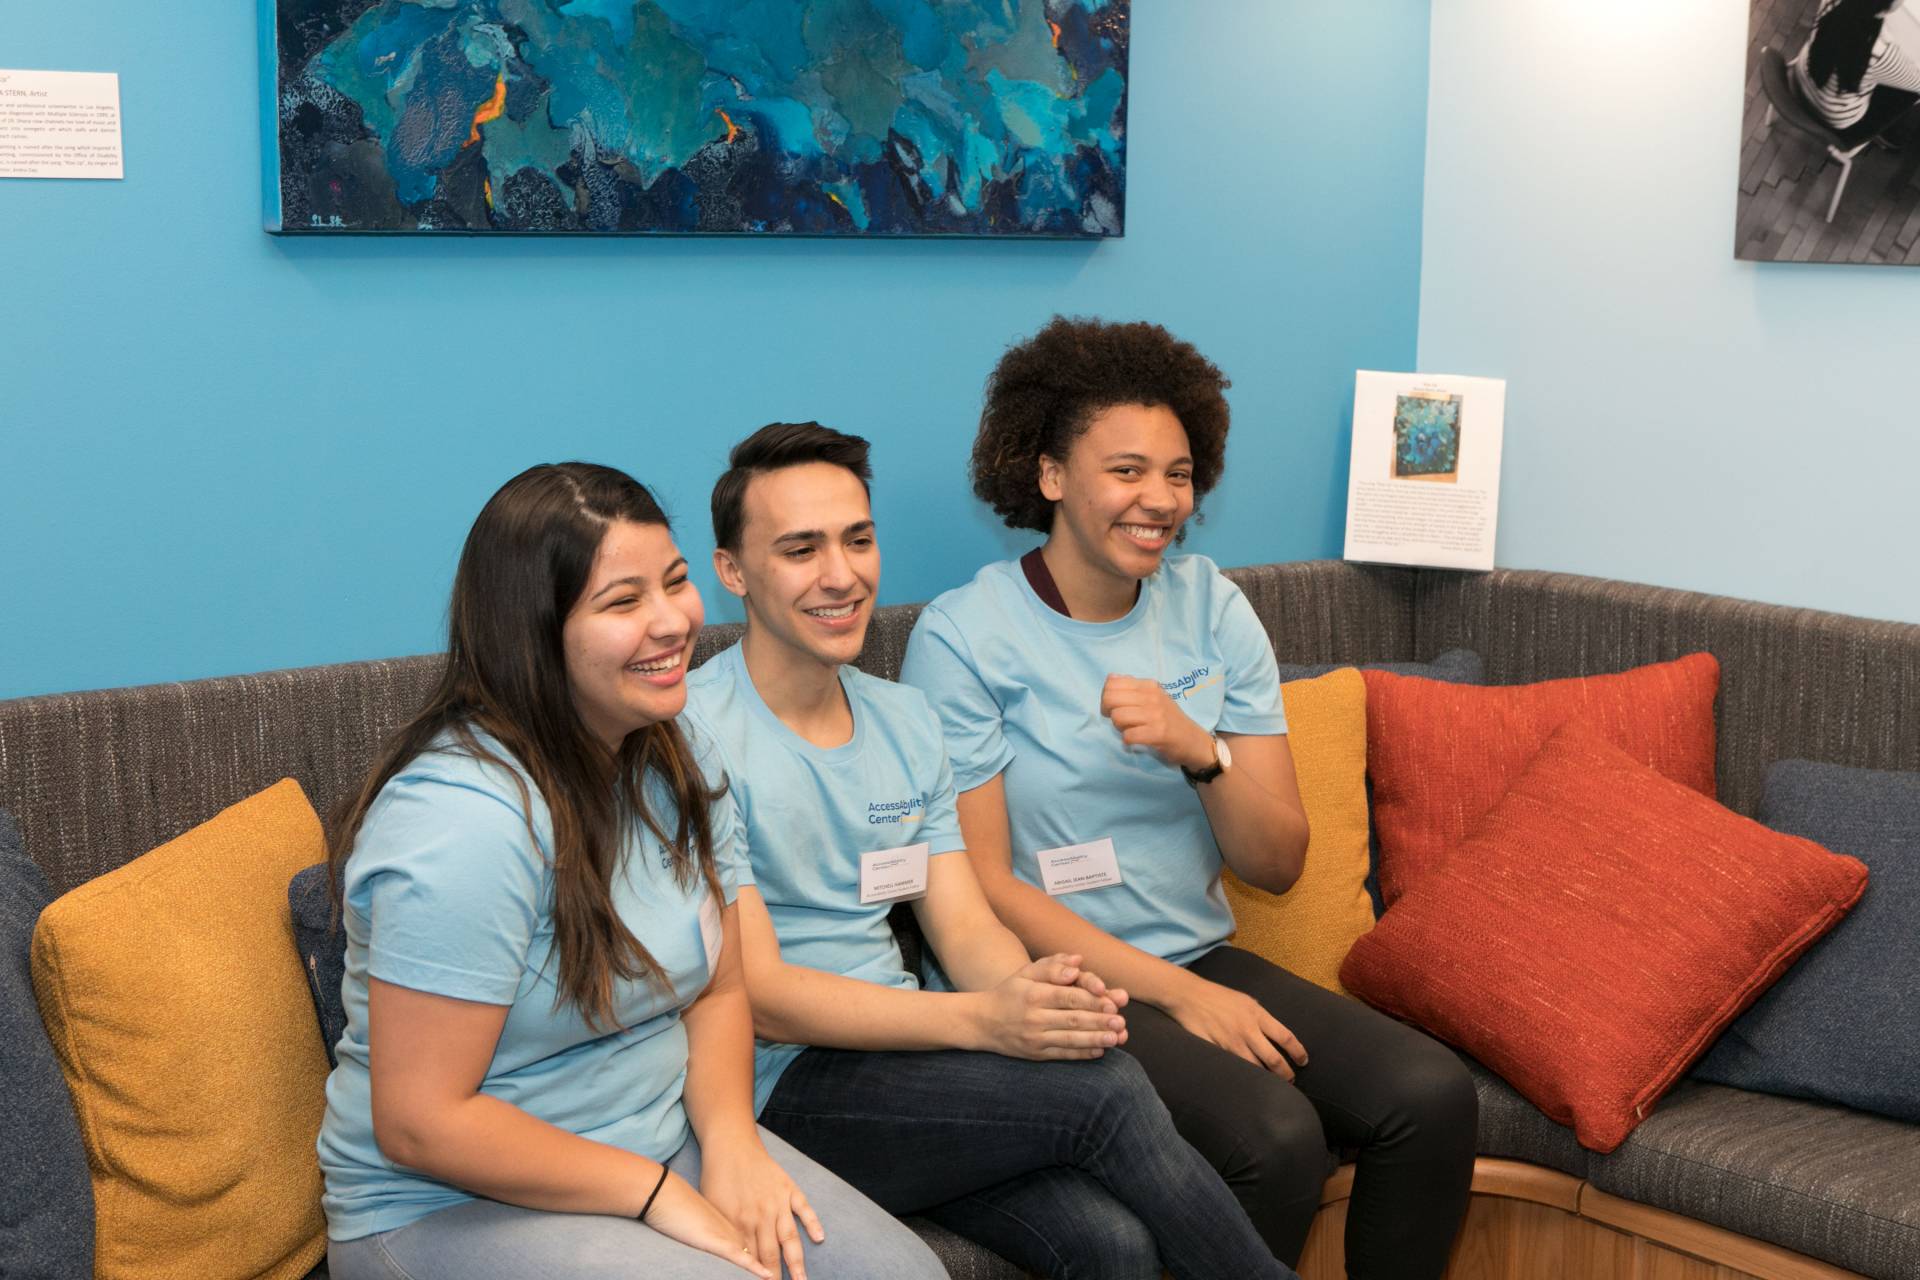 Office of Disability Services' student fellows, from left, Monica Magalhaes, Mitchell Hammer and Abby Jean-Baptiste sitting on couch